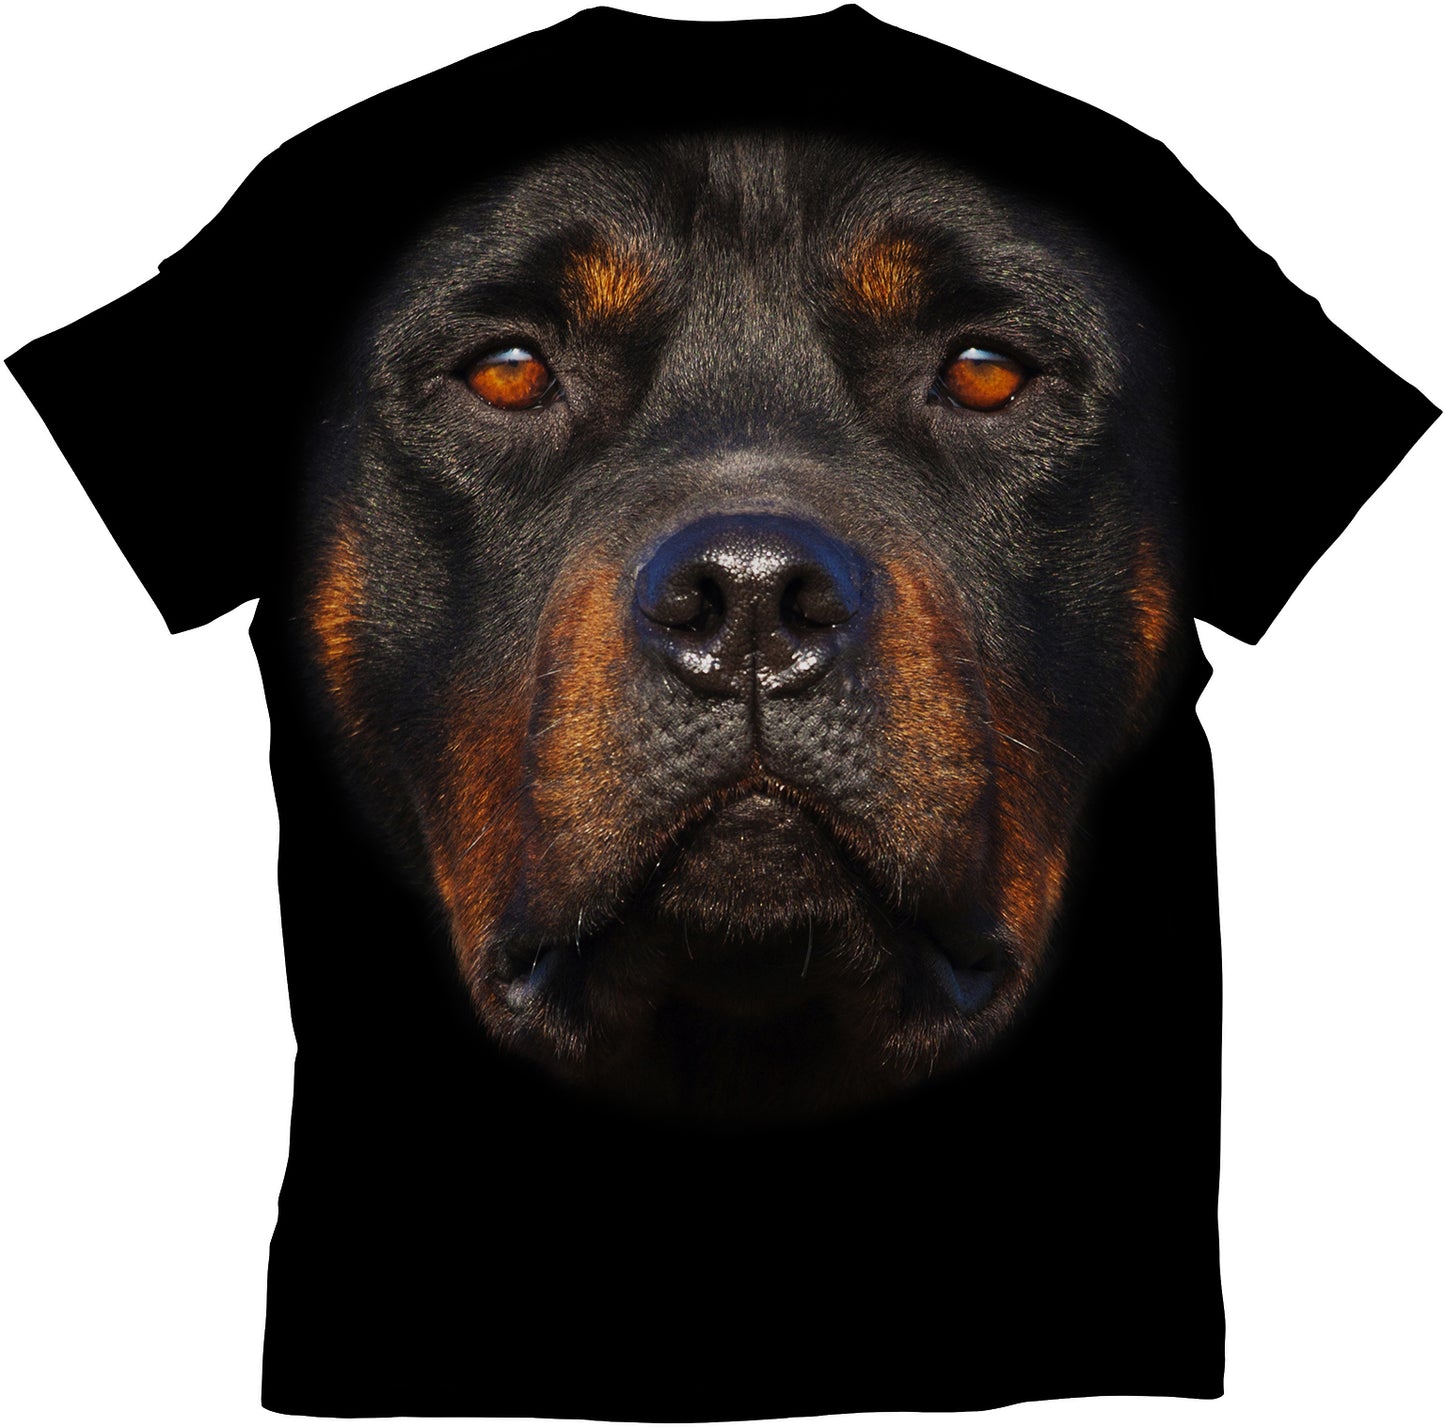 standout rottweiler t shirt all over print dog face t shirt redwolf souled store bewakoof osomwear dog show in india the kennel club of india dog t shirts for humans funny dog shirts dog graphic t shirts dogteeshop dog lover t shirt dog clothes online dog print t shirts india pet lover t shirt 3d animal print t shirts pet supply the mountain t shirt rottweiler t shirt